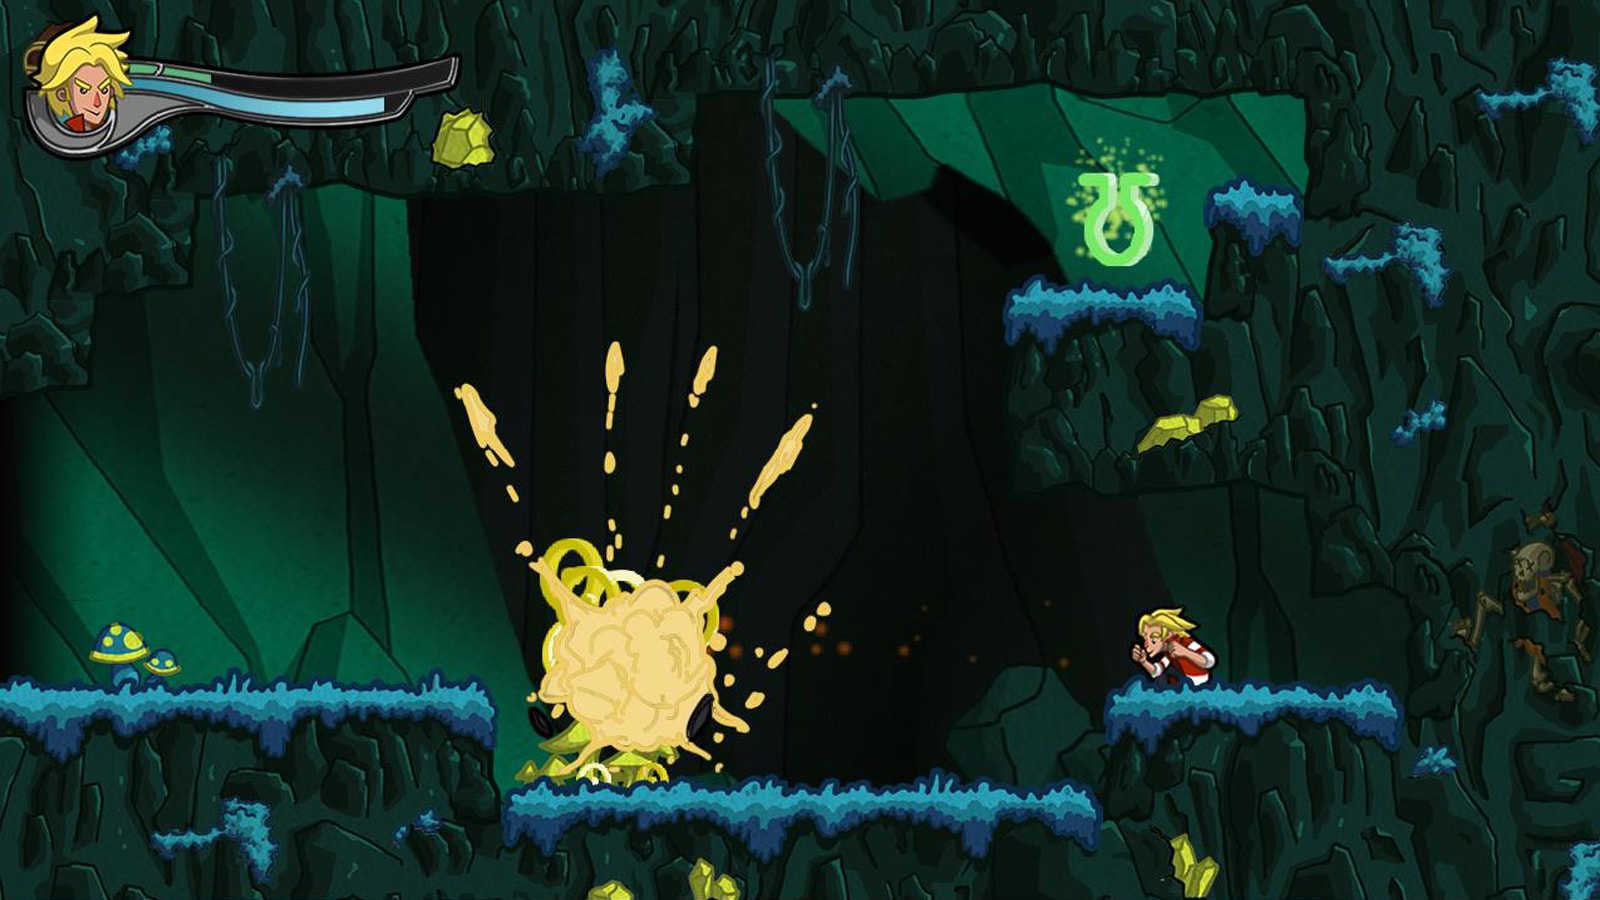 Jero crouches as a yellow explosion occurs across the screen